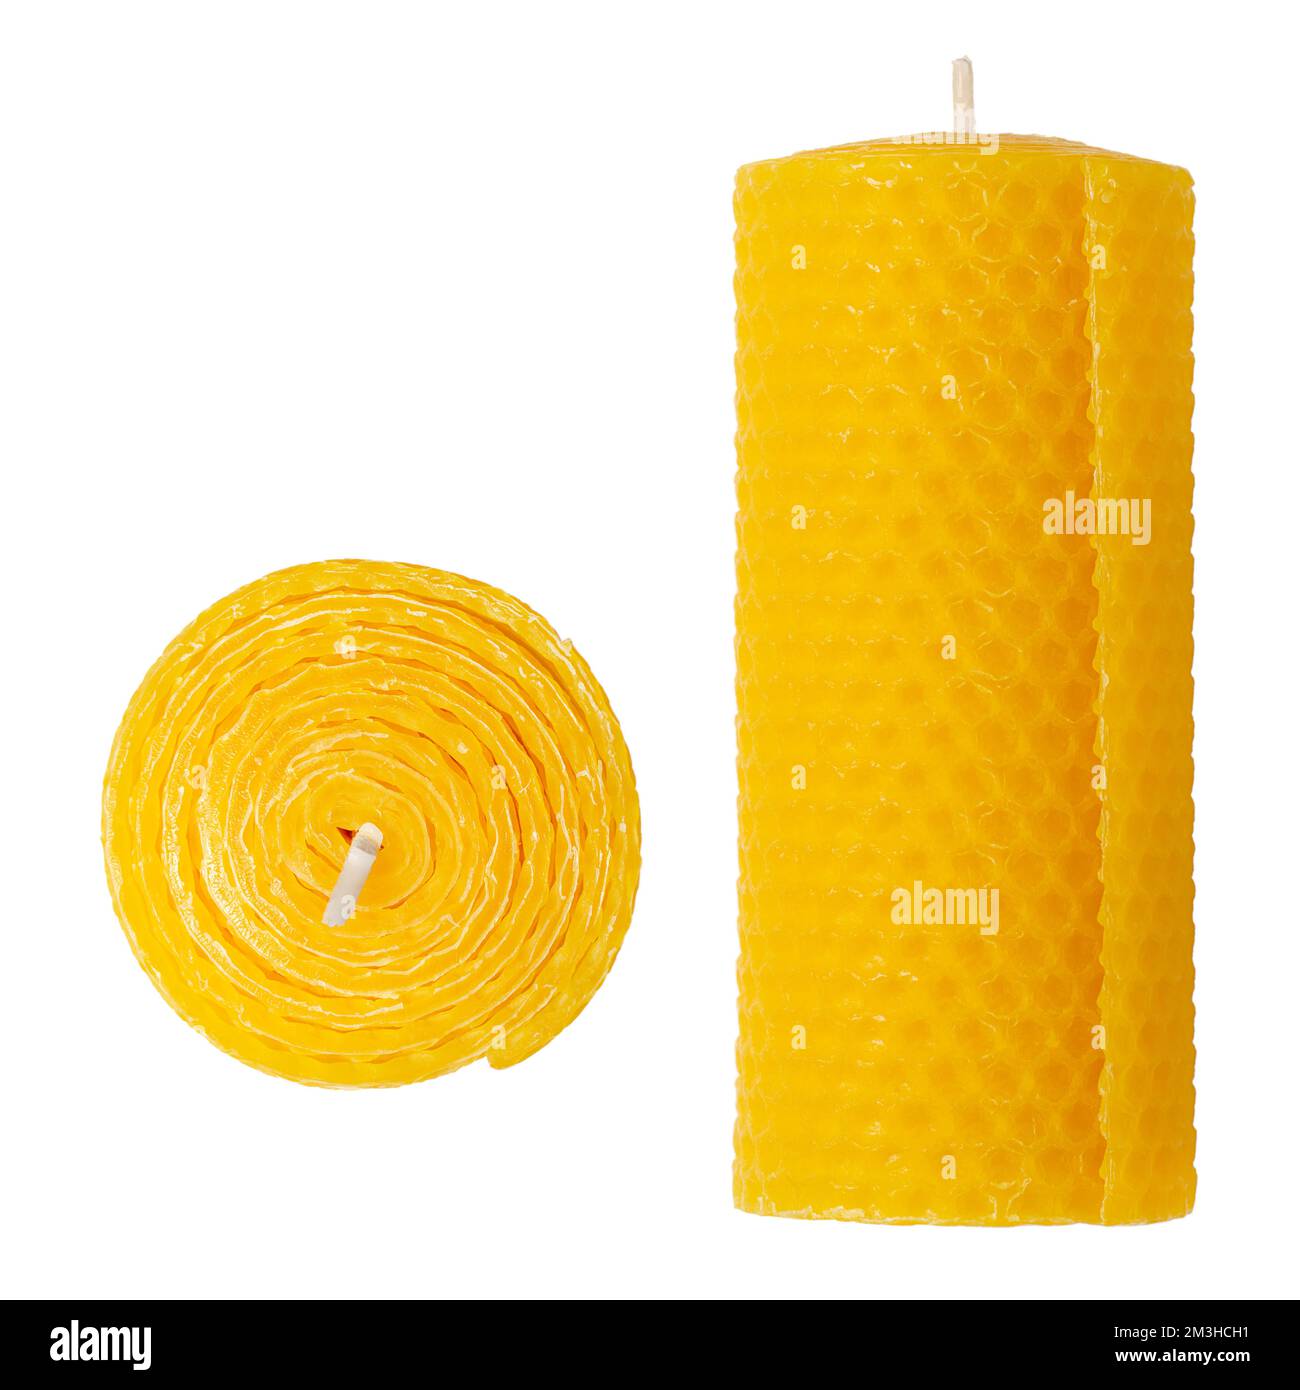 Beeswax pillar candle, isolated from above and front view. Made by pressing natural bees wax between metal rollers, for the typical honeycomb pattern. Stock Photo